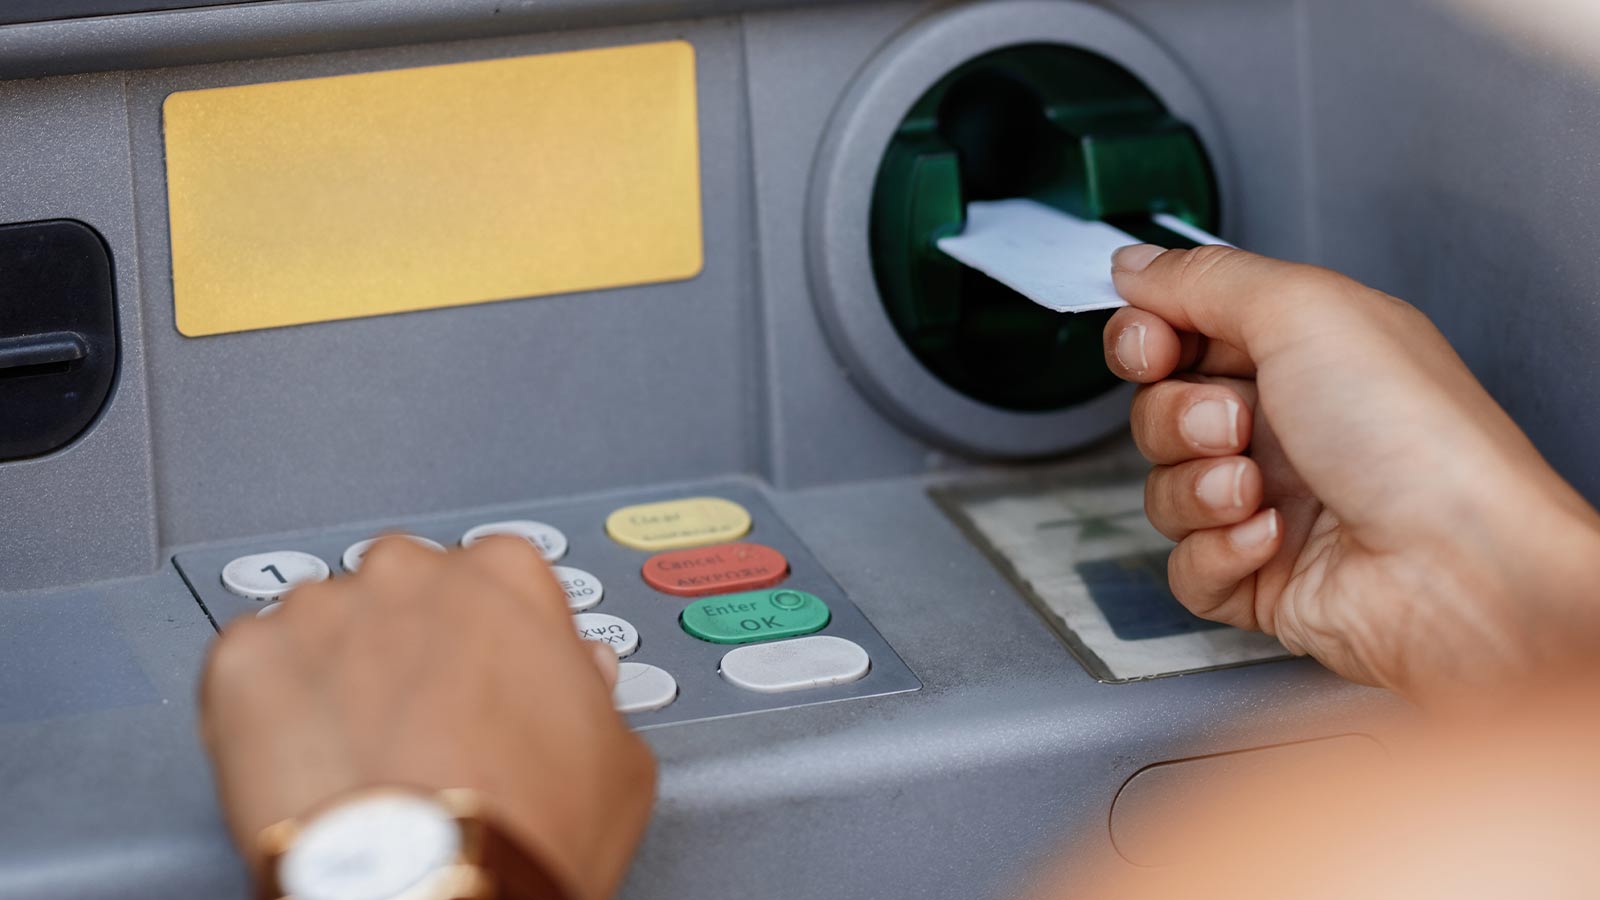 Check ATMs before using them